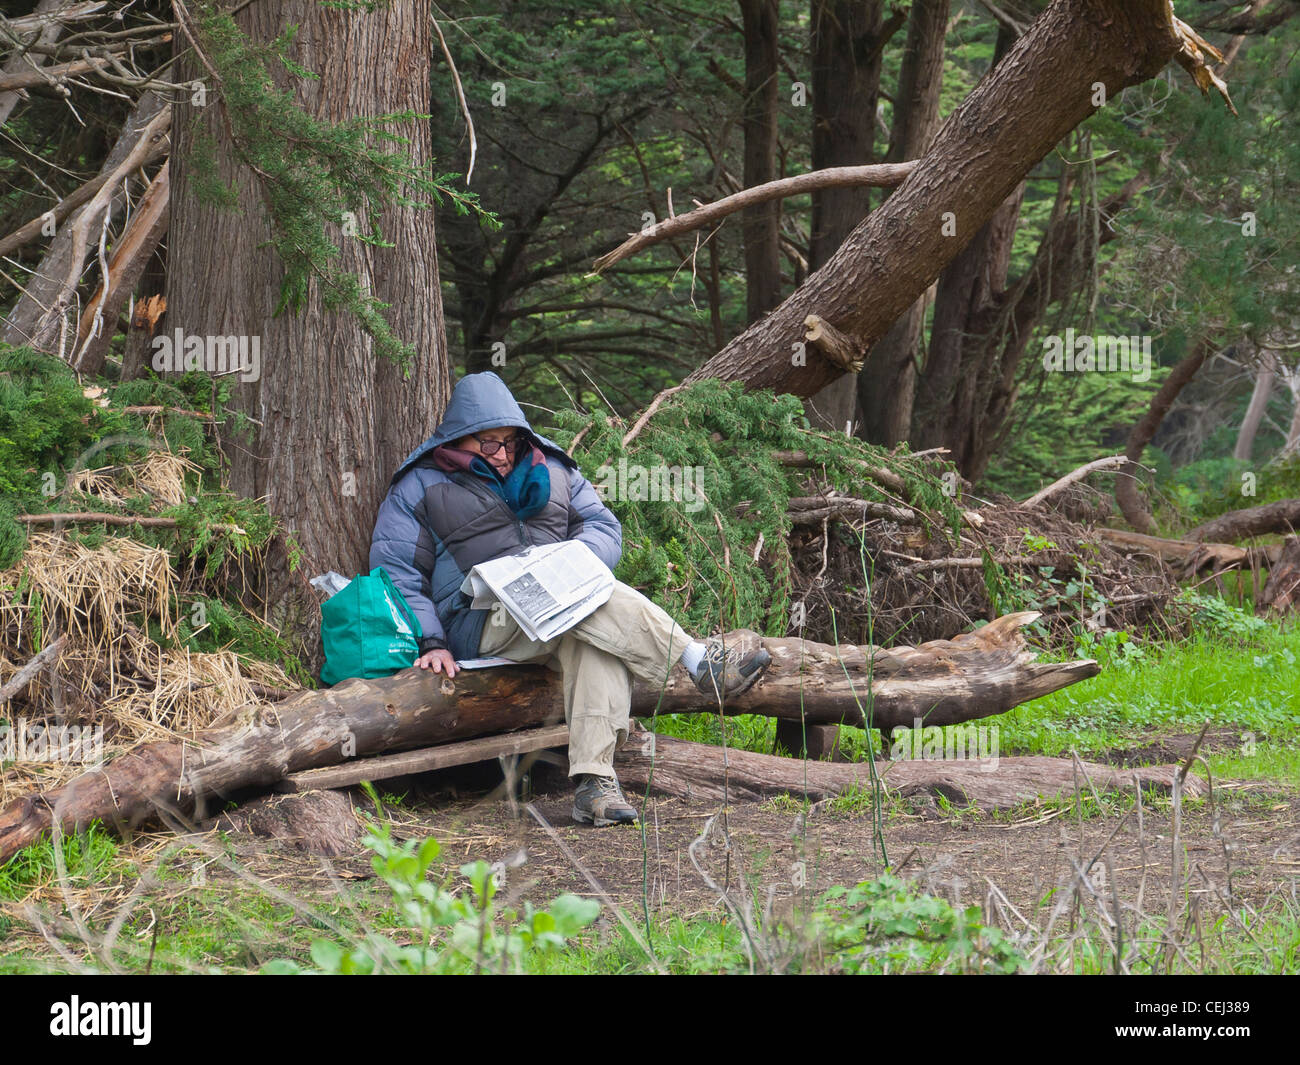 A 50-60 year old man bundled up in hooded parka sitting on a fallen tree branch reading newspaper in San Francisco, California. Stock Photo